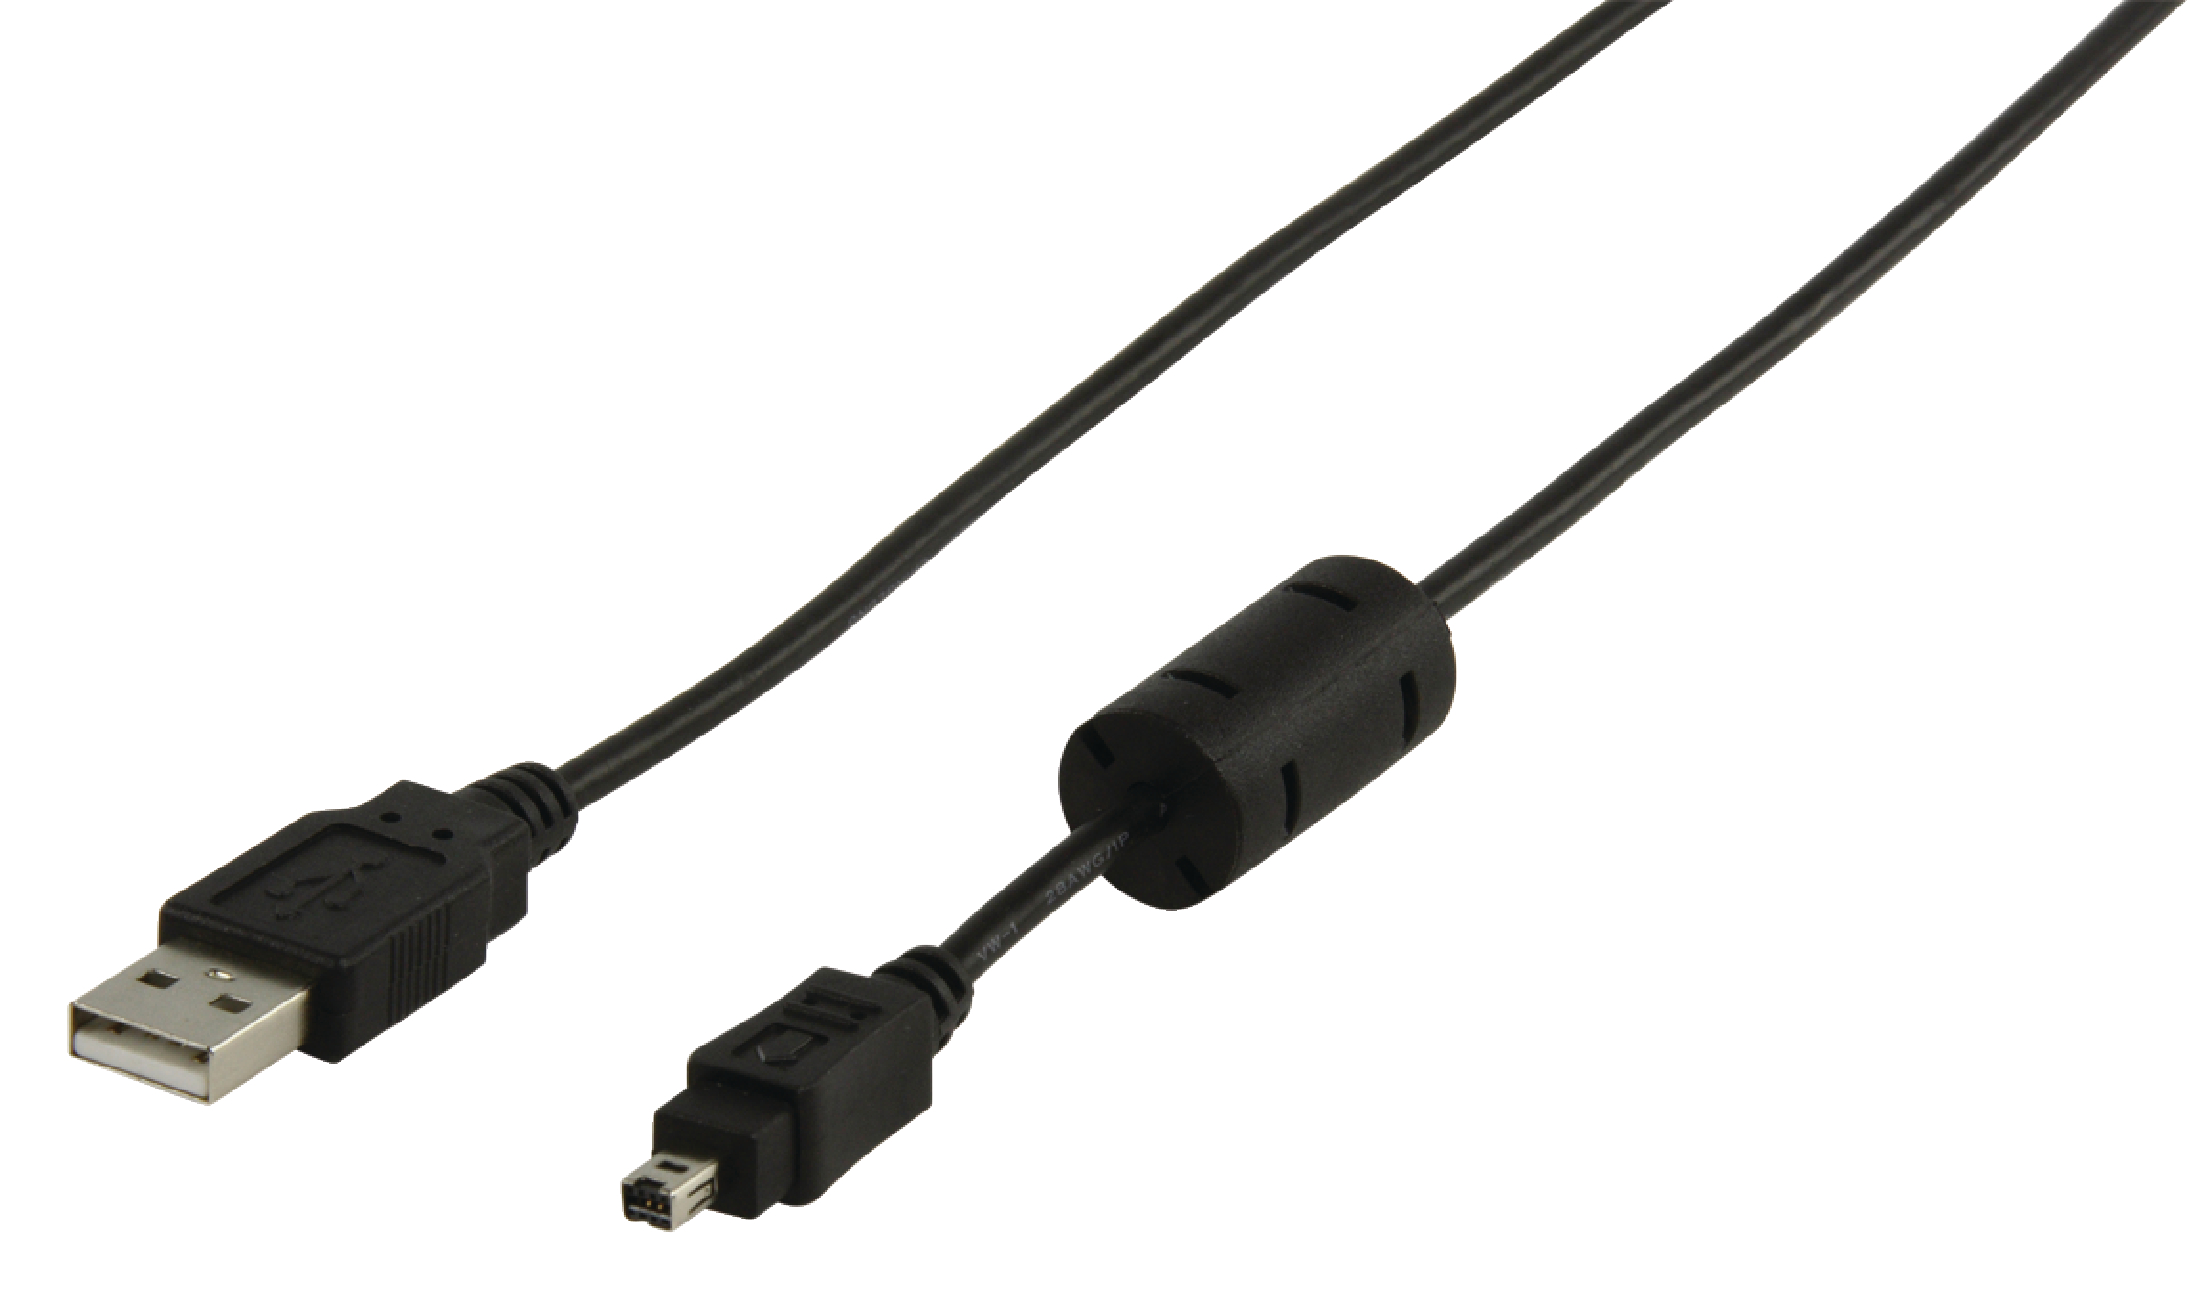 CABLE-297 USB2.0 CONNECTION CABLE FOR MINOLTA CAMERA 8PIN